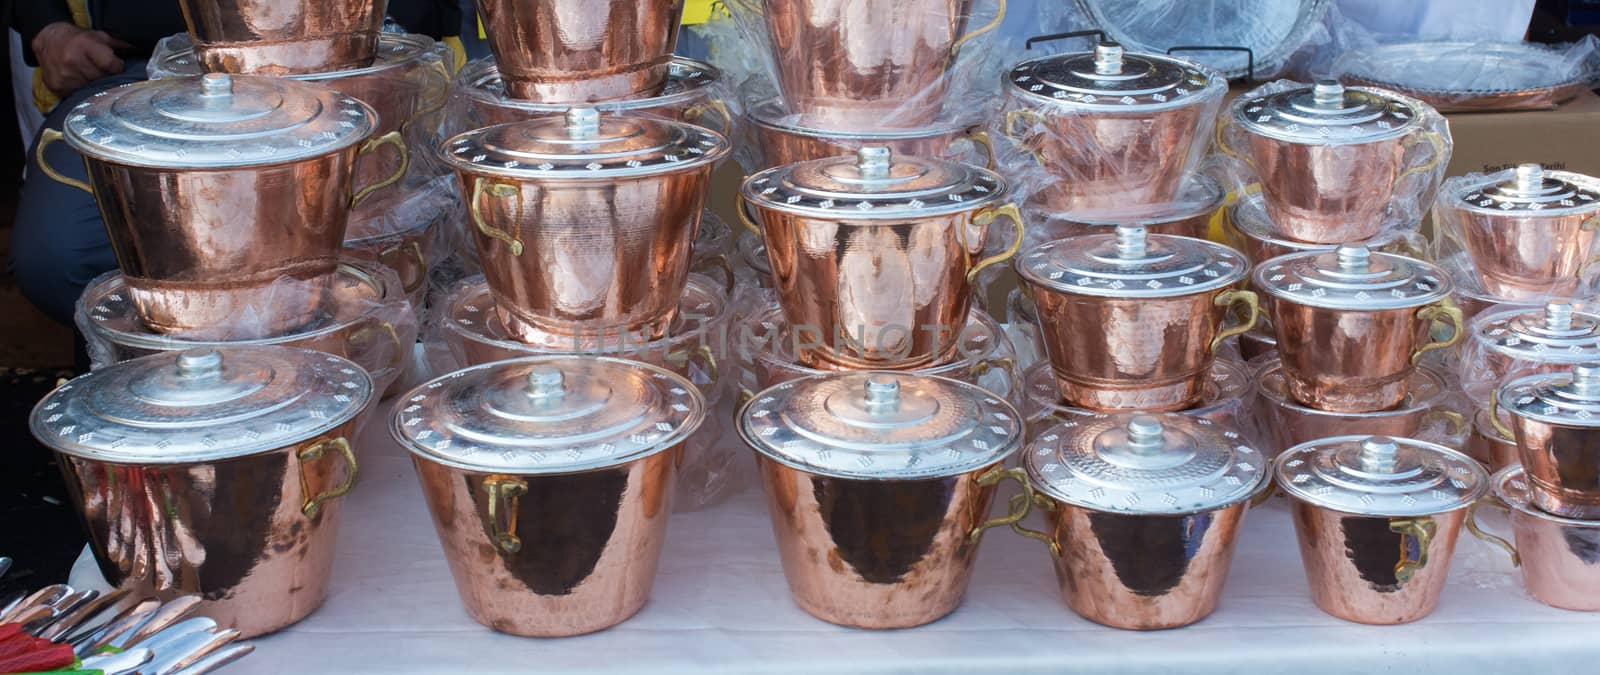 Little set of buckets of made of metal in a market place